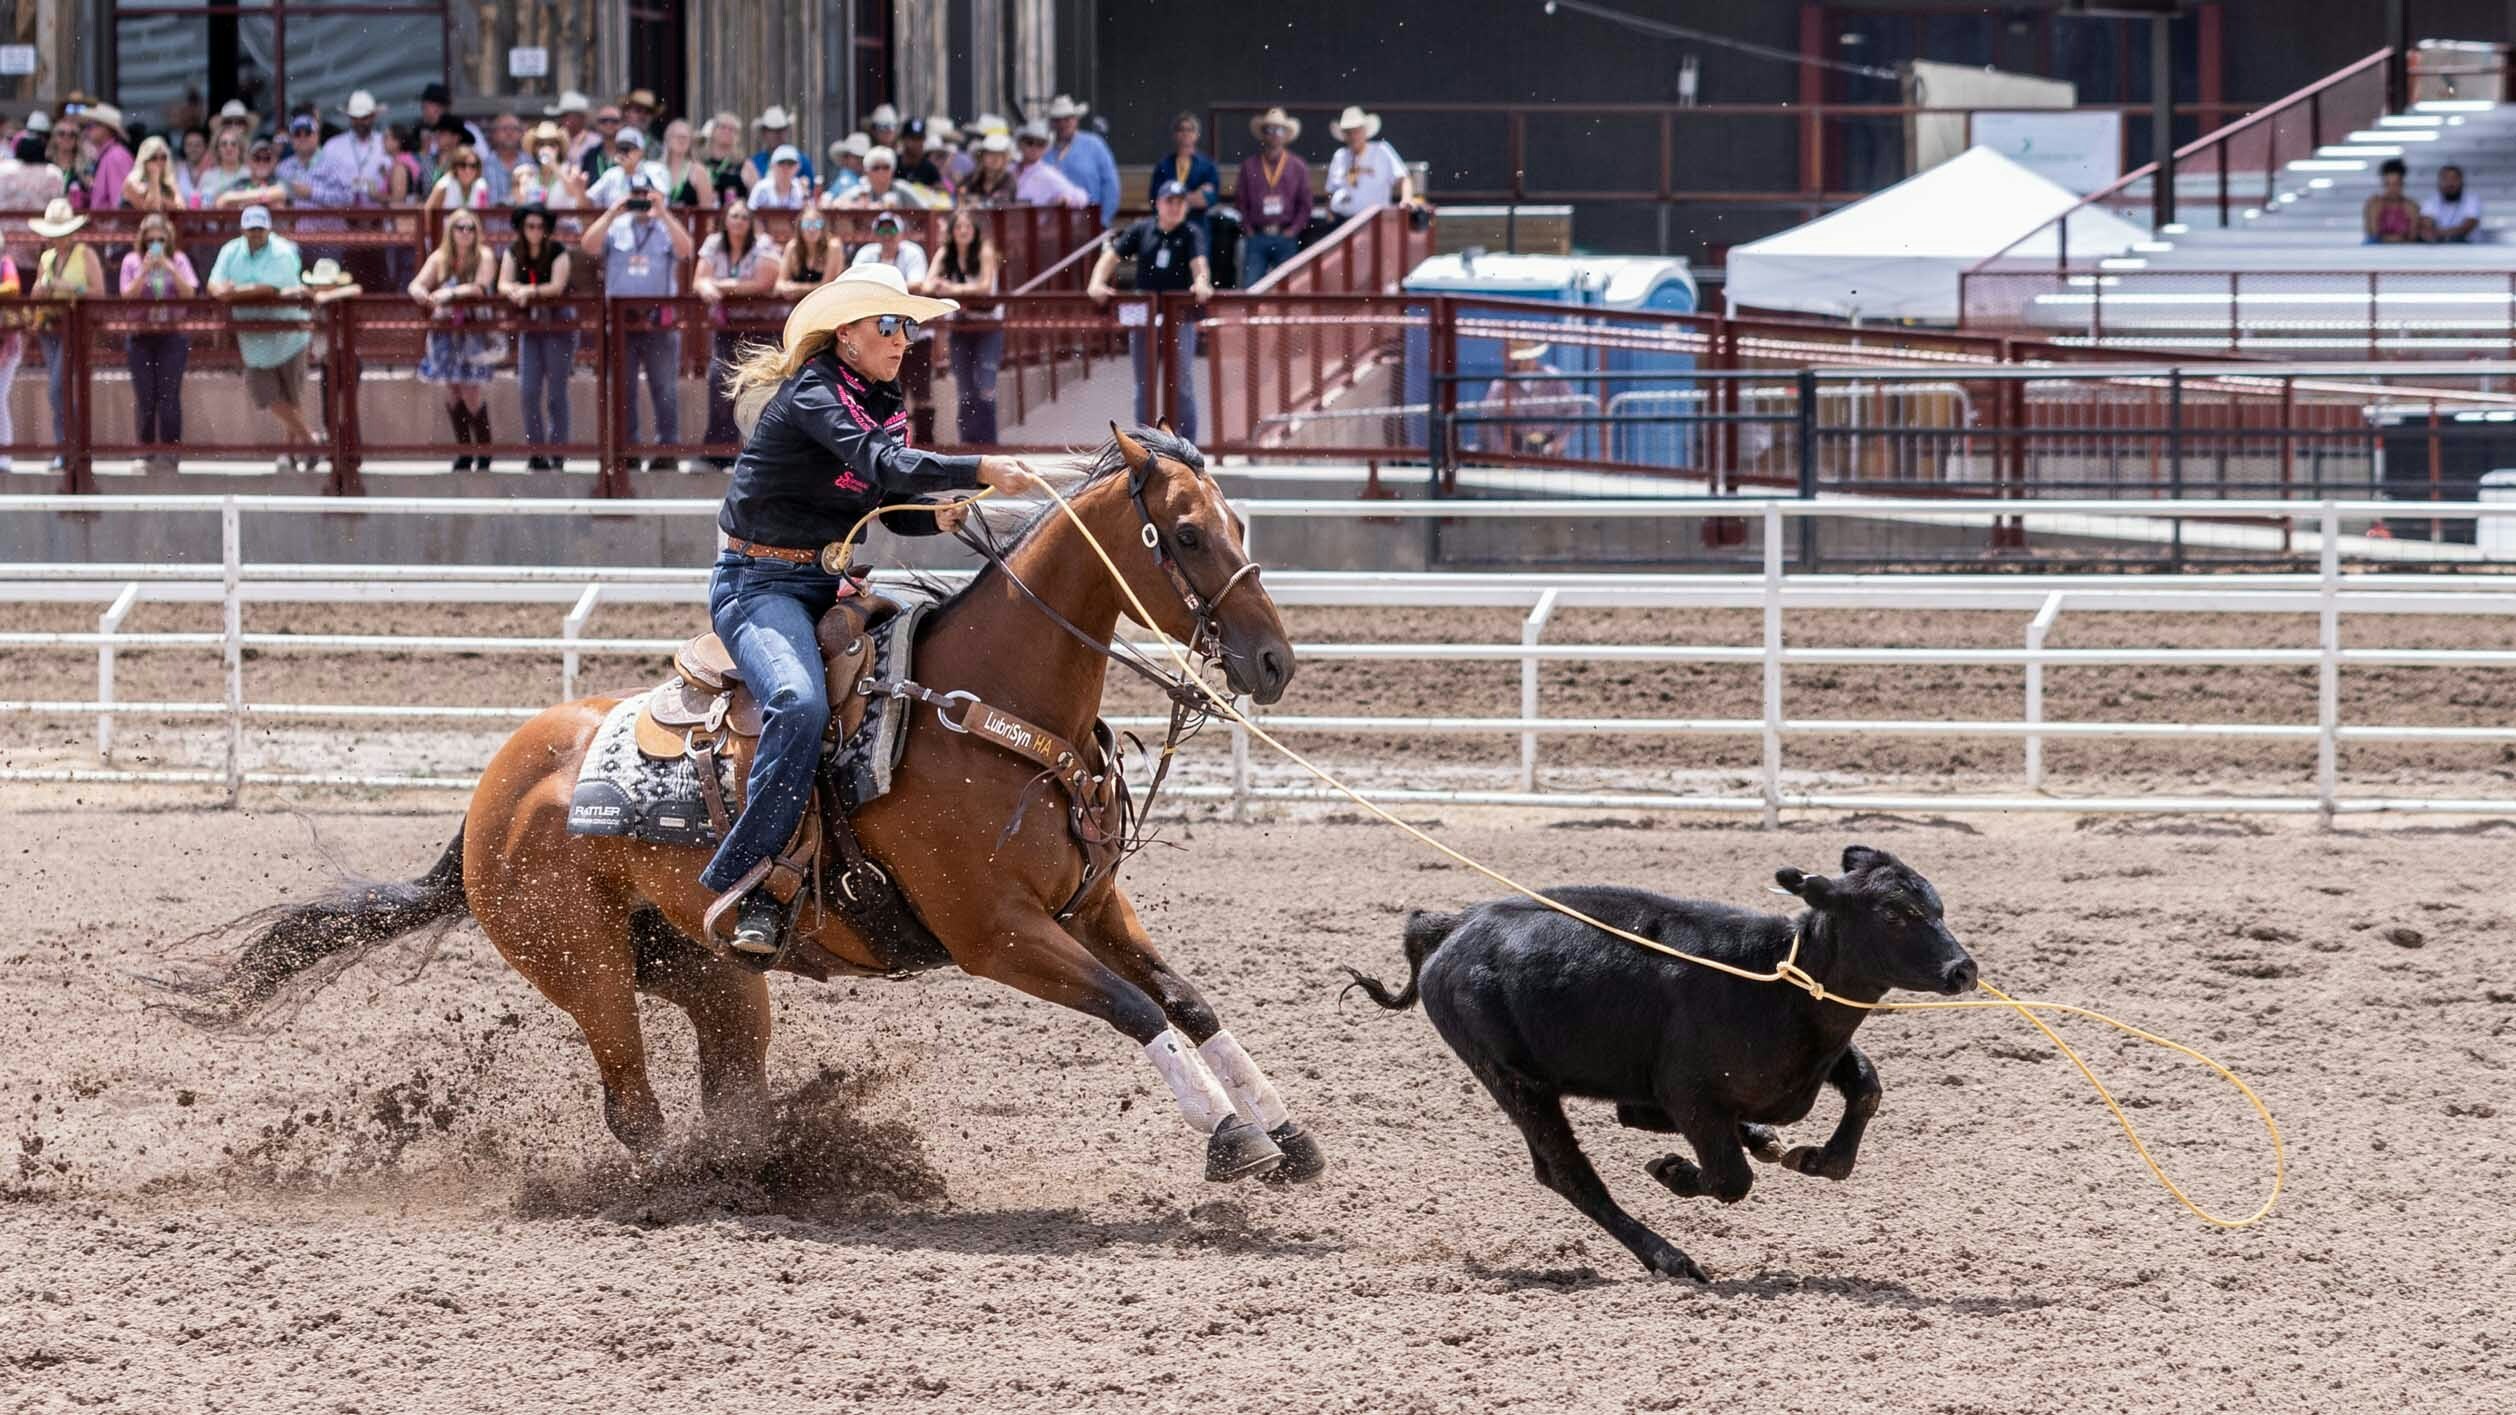 Jackie Crawford from Stephenville, TX ropes her calf in the Breakaway Roping on July 27, 2023.